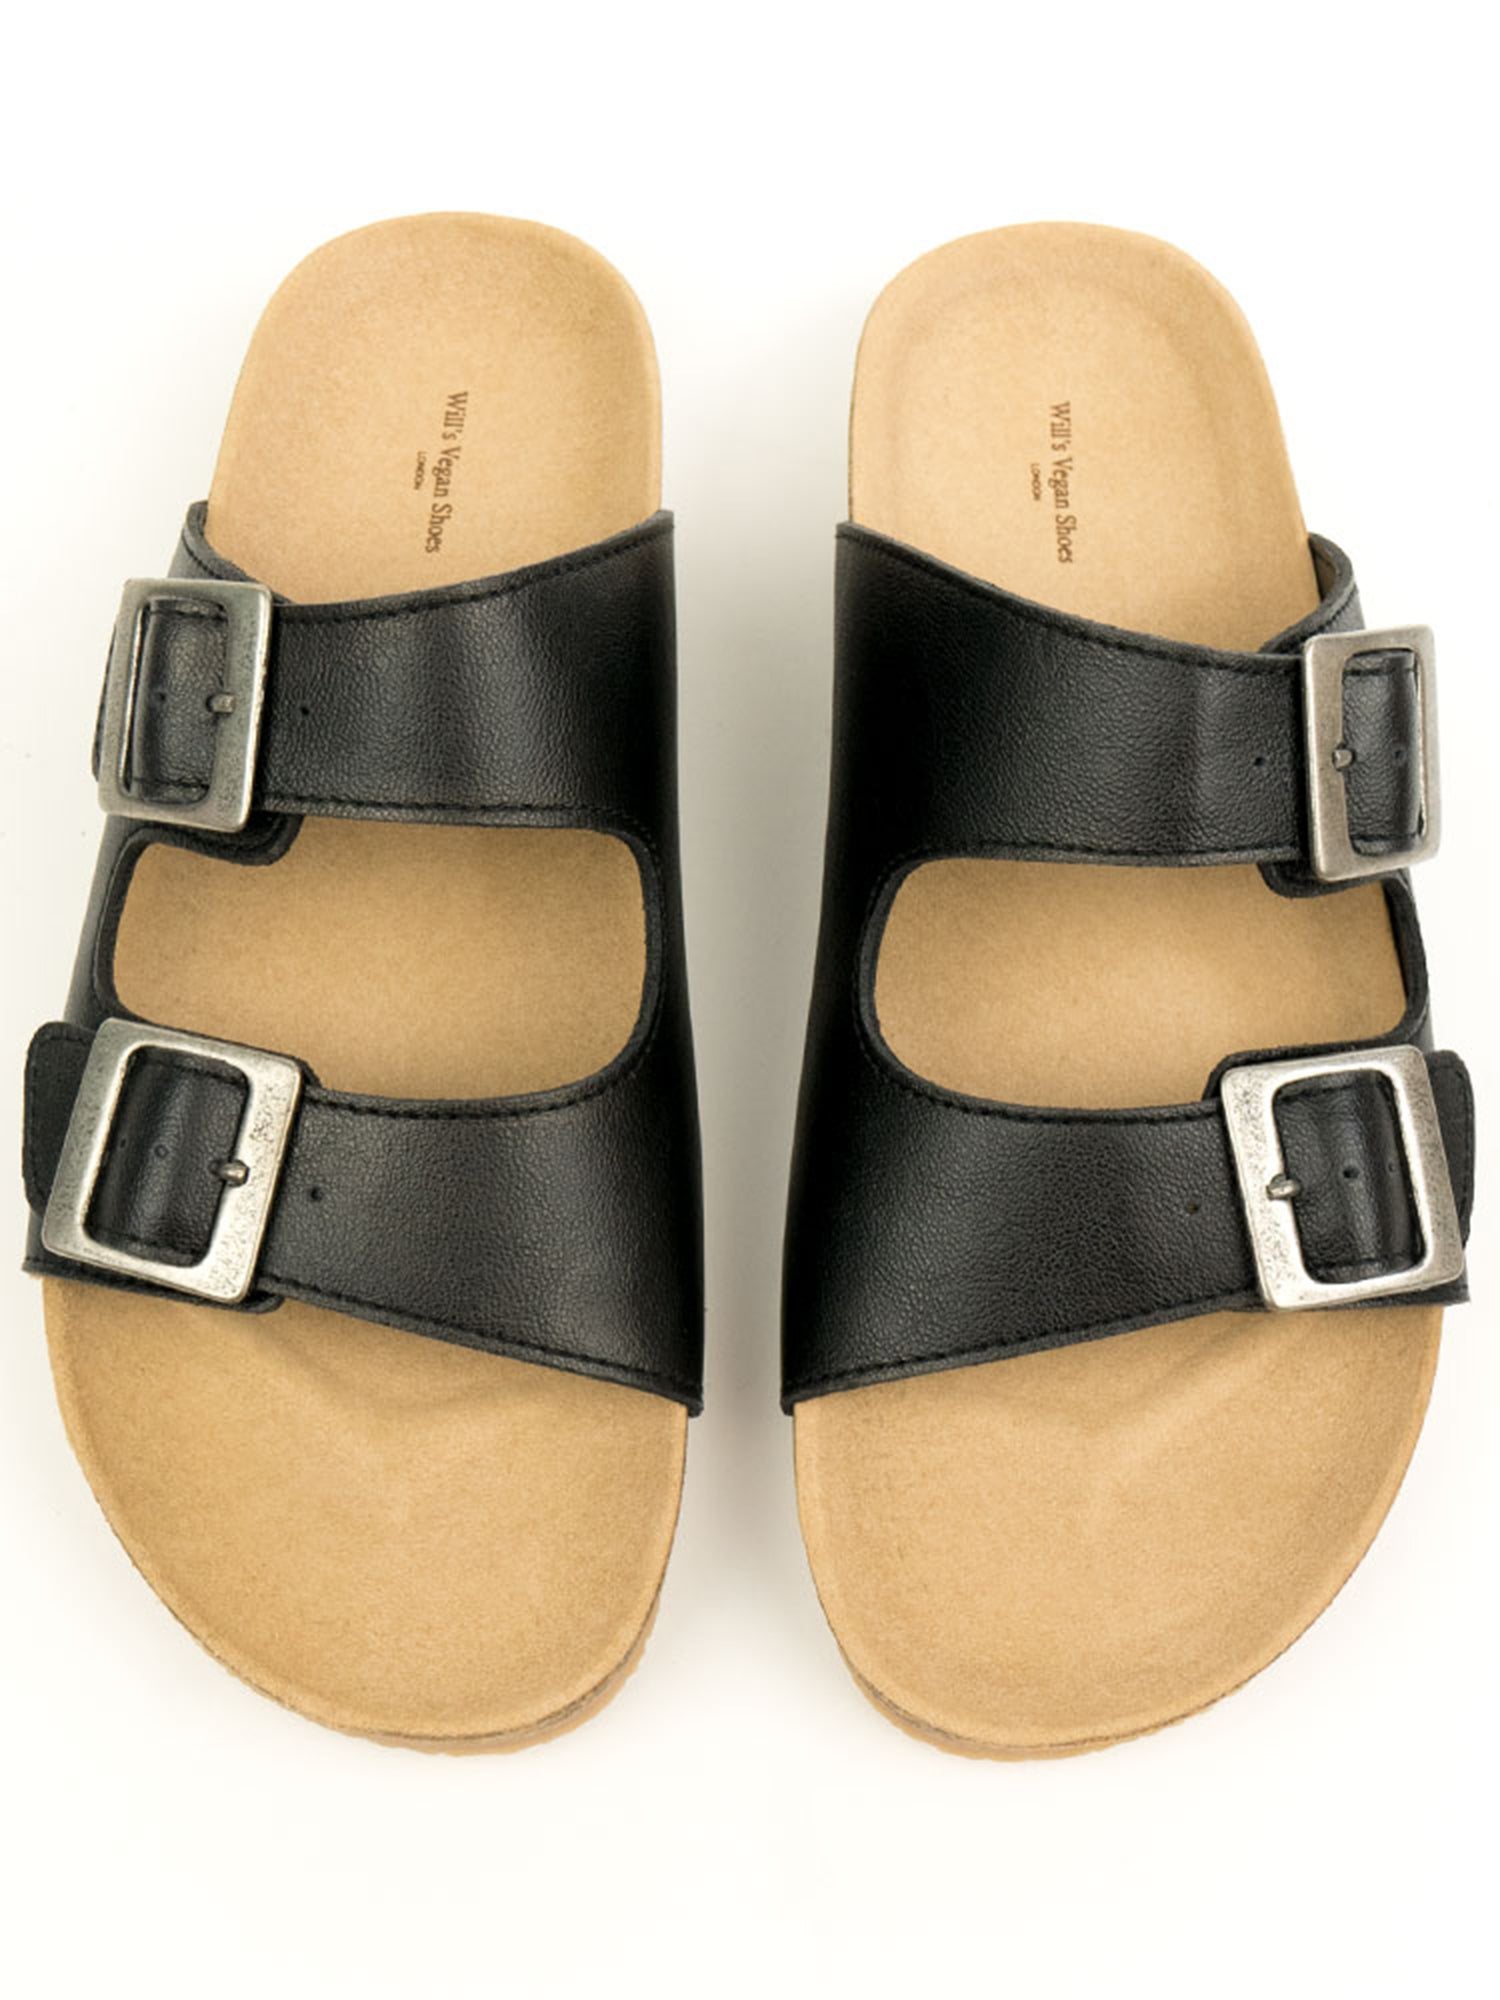 Will's Vegan Store Women's Two Strap Sandals